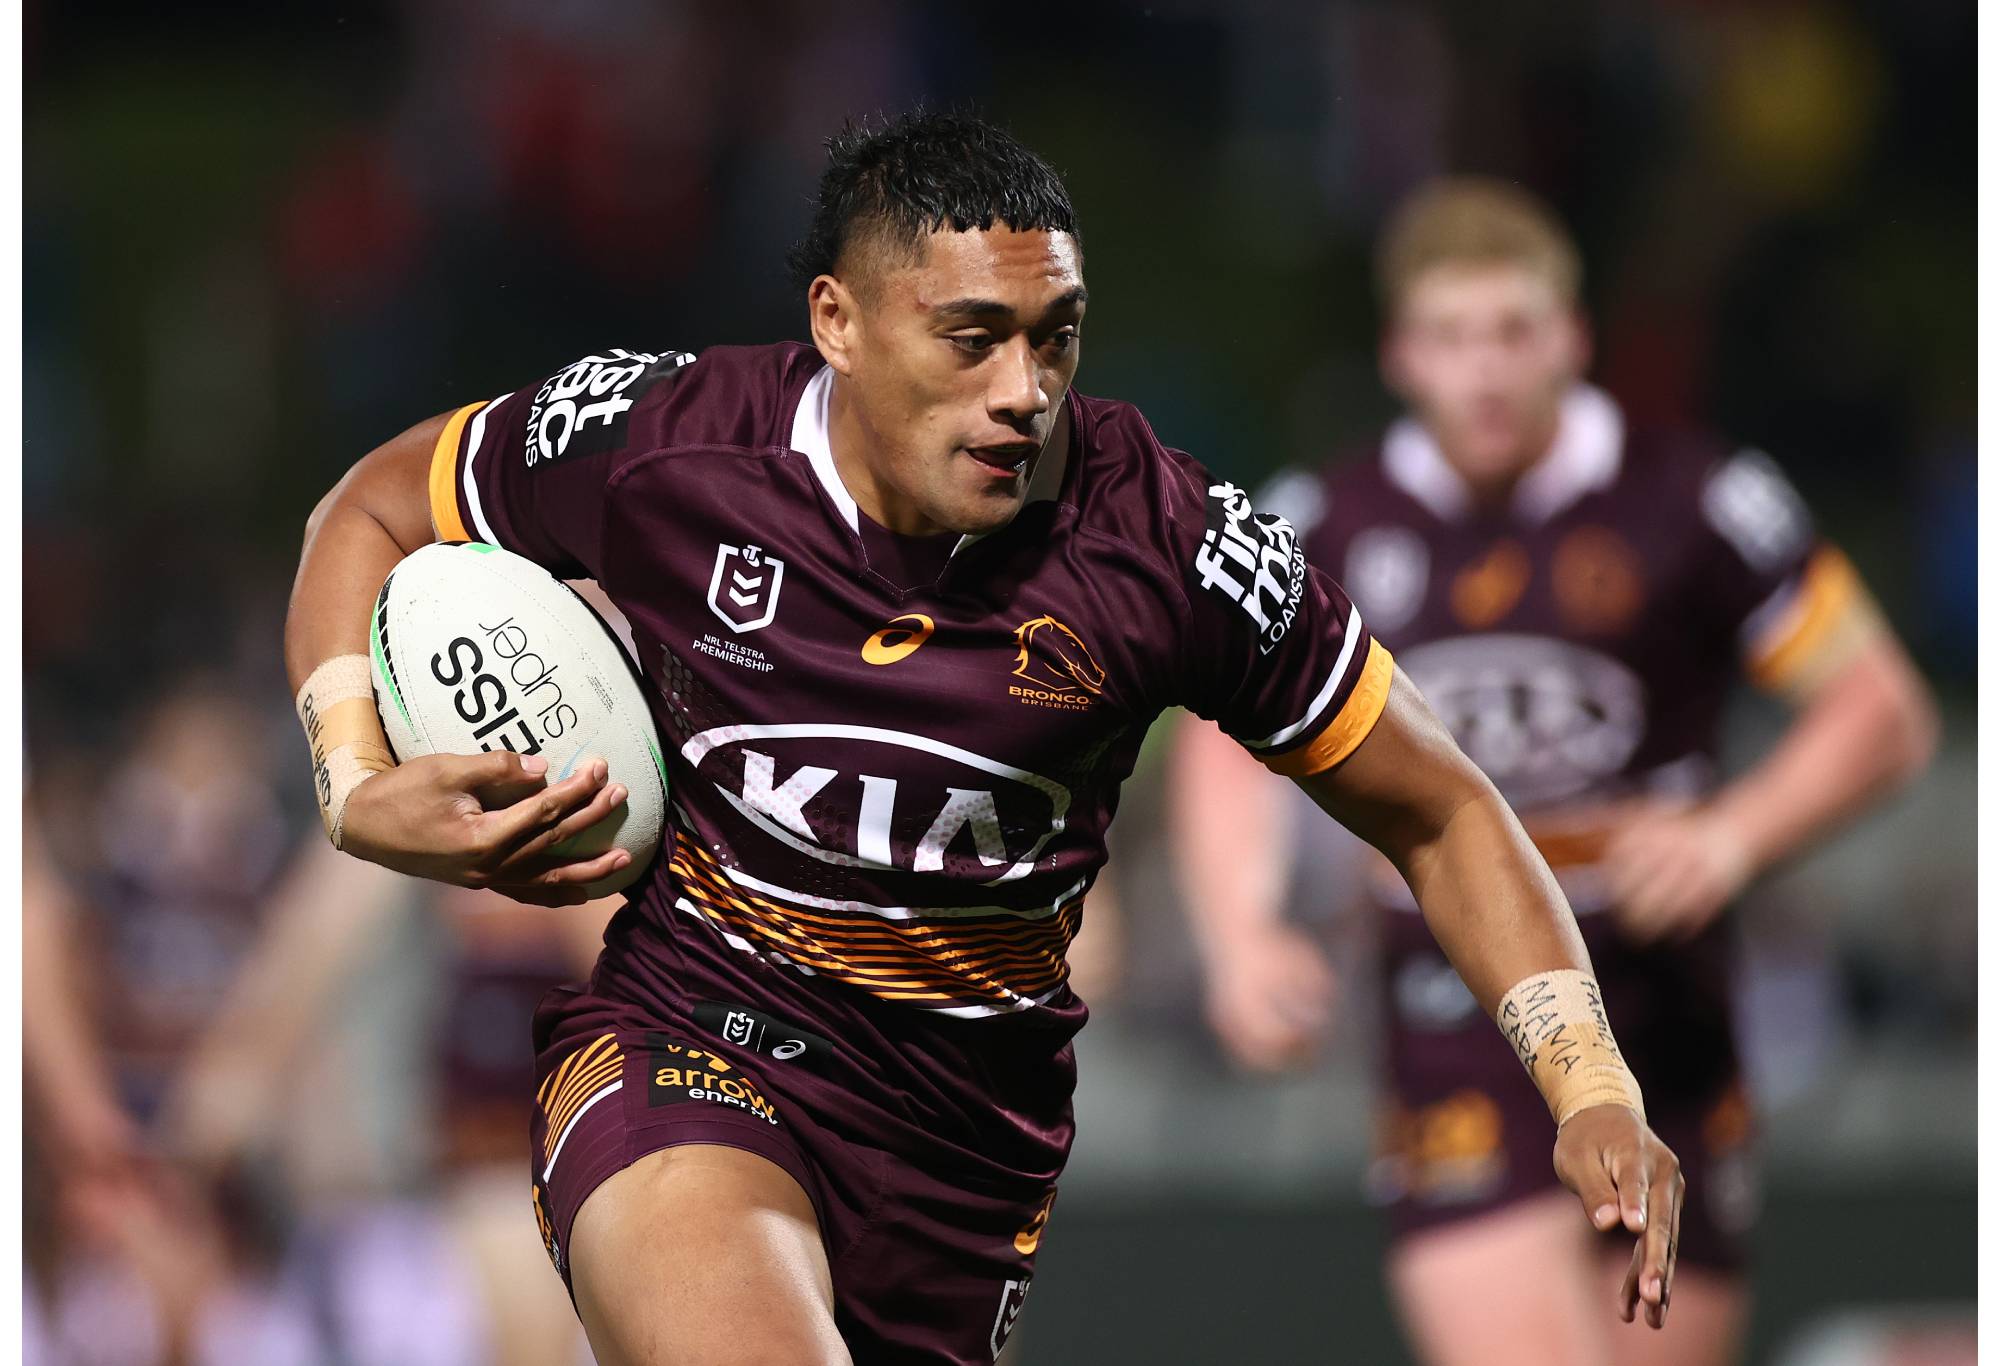 SYDNEY, AUSTRALIA - JUNE 03: TC Robati of the Broncos makes a break during the round 13 NRL match between the St George Illawarra Dragons and the Brisbane Broncos at Netstrata Jubilee Stadium on June 03, 2021, in Sydney, Australia. (Photo by Cameron Spencer/Getty Images)